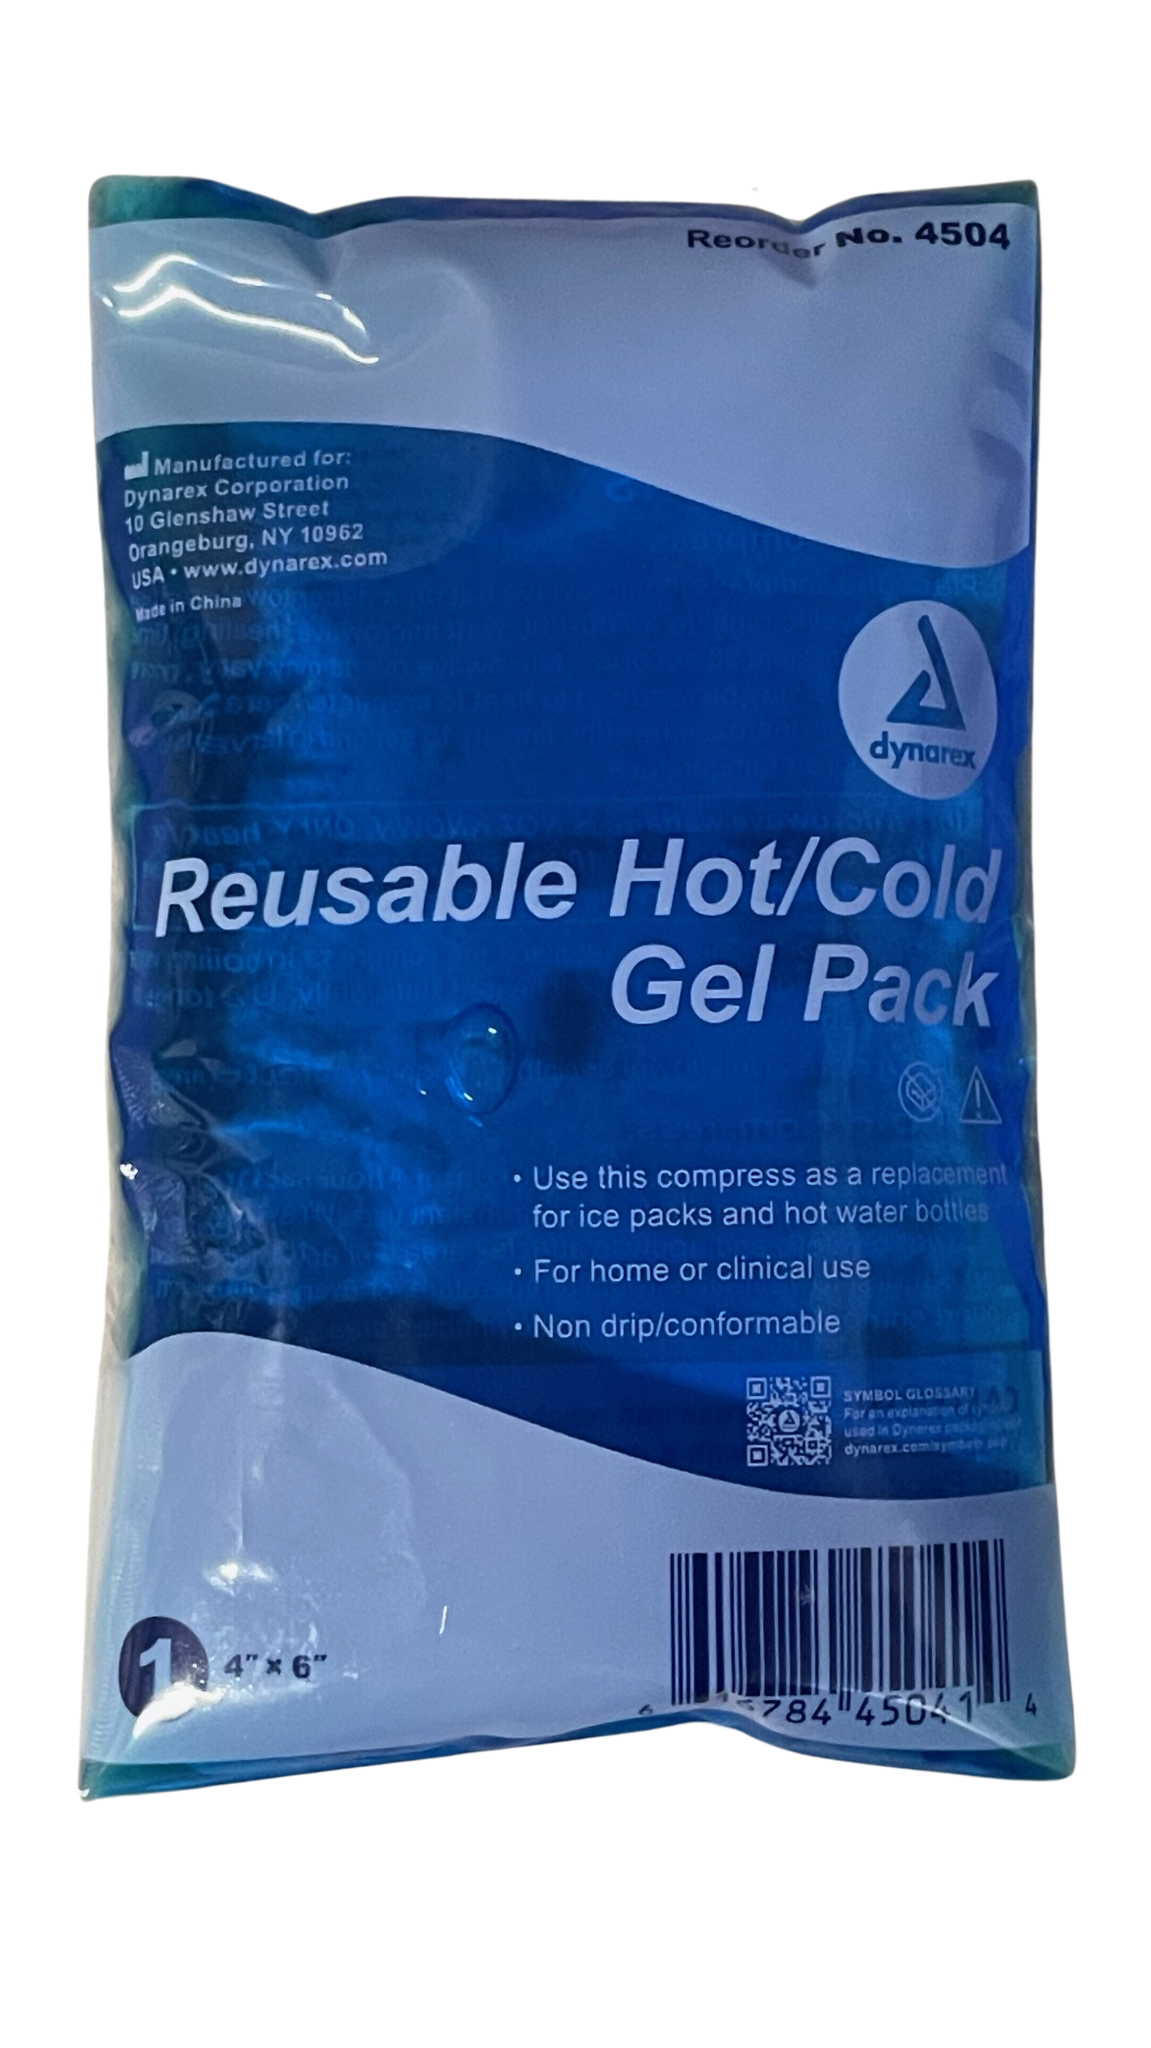 Reusable Hot/Cold Gel Pack, 4''x6